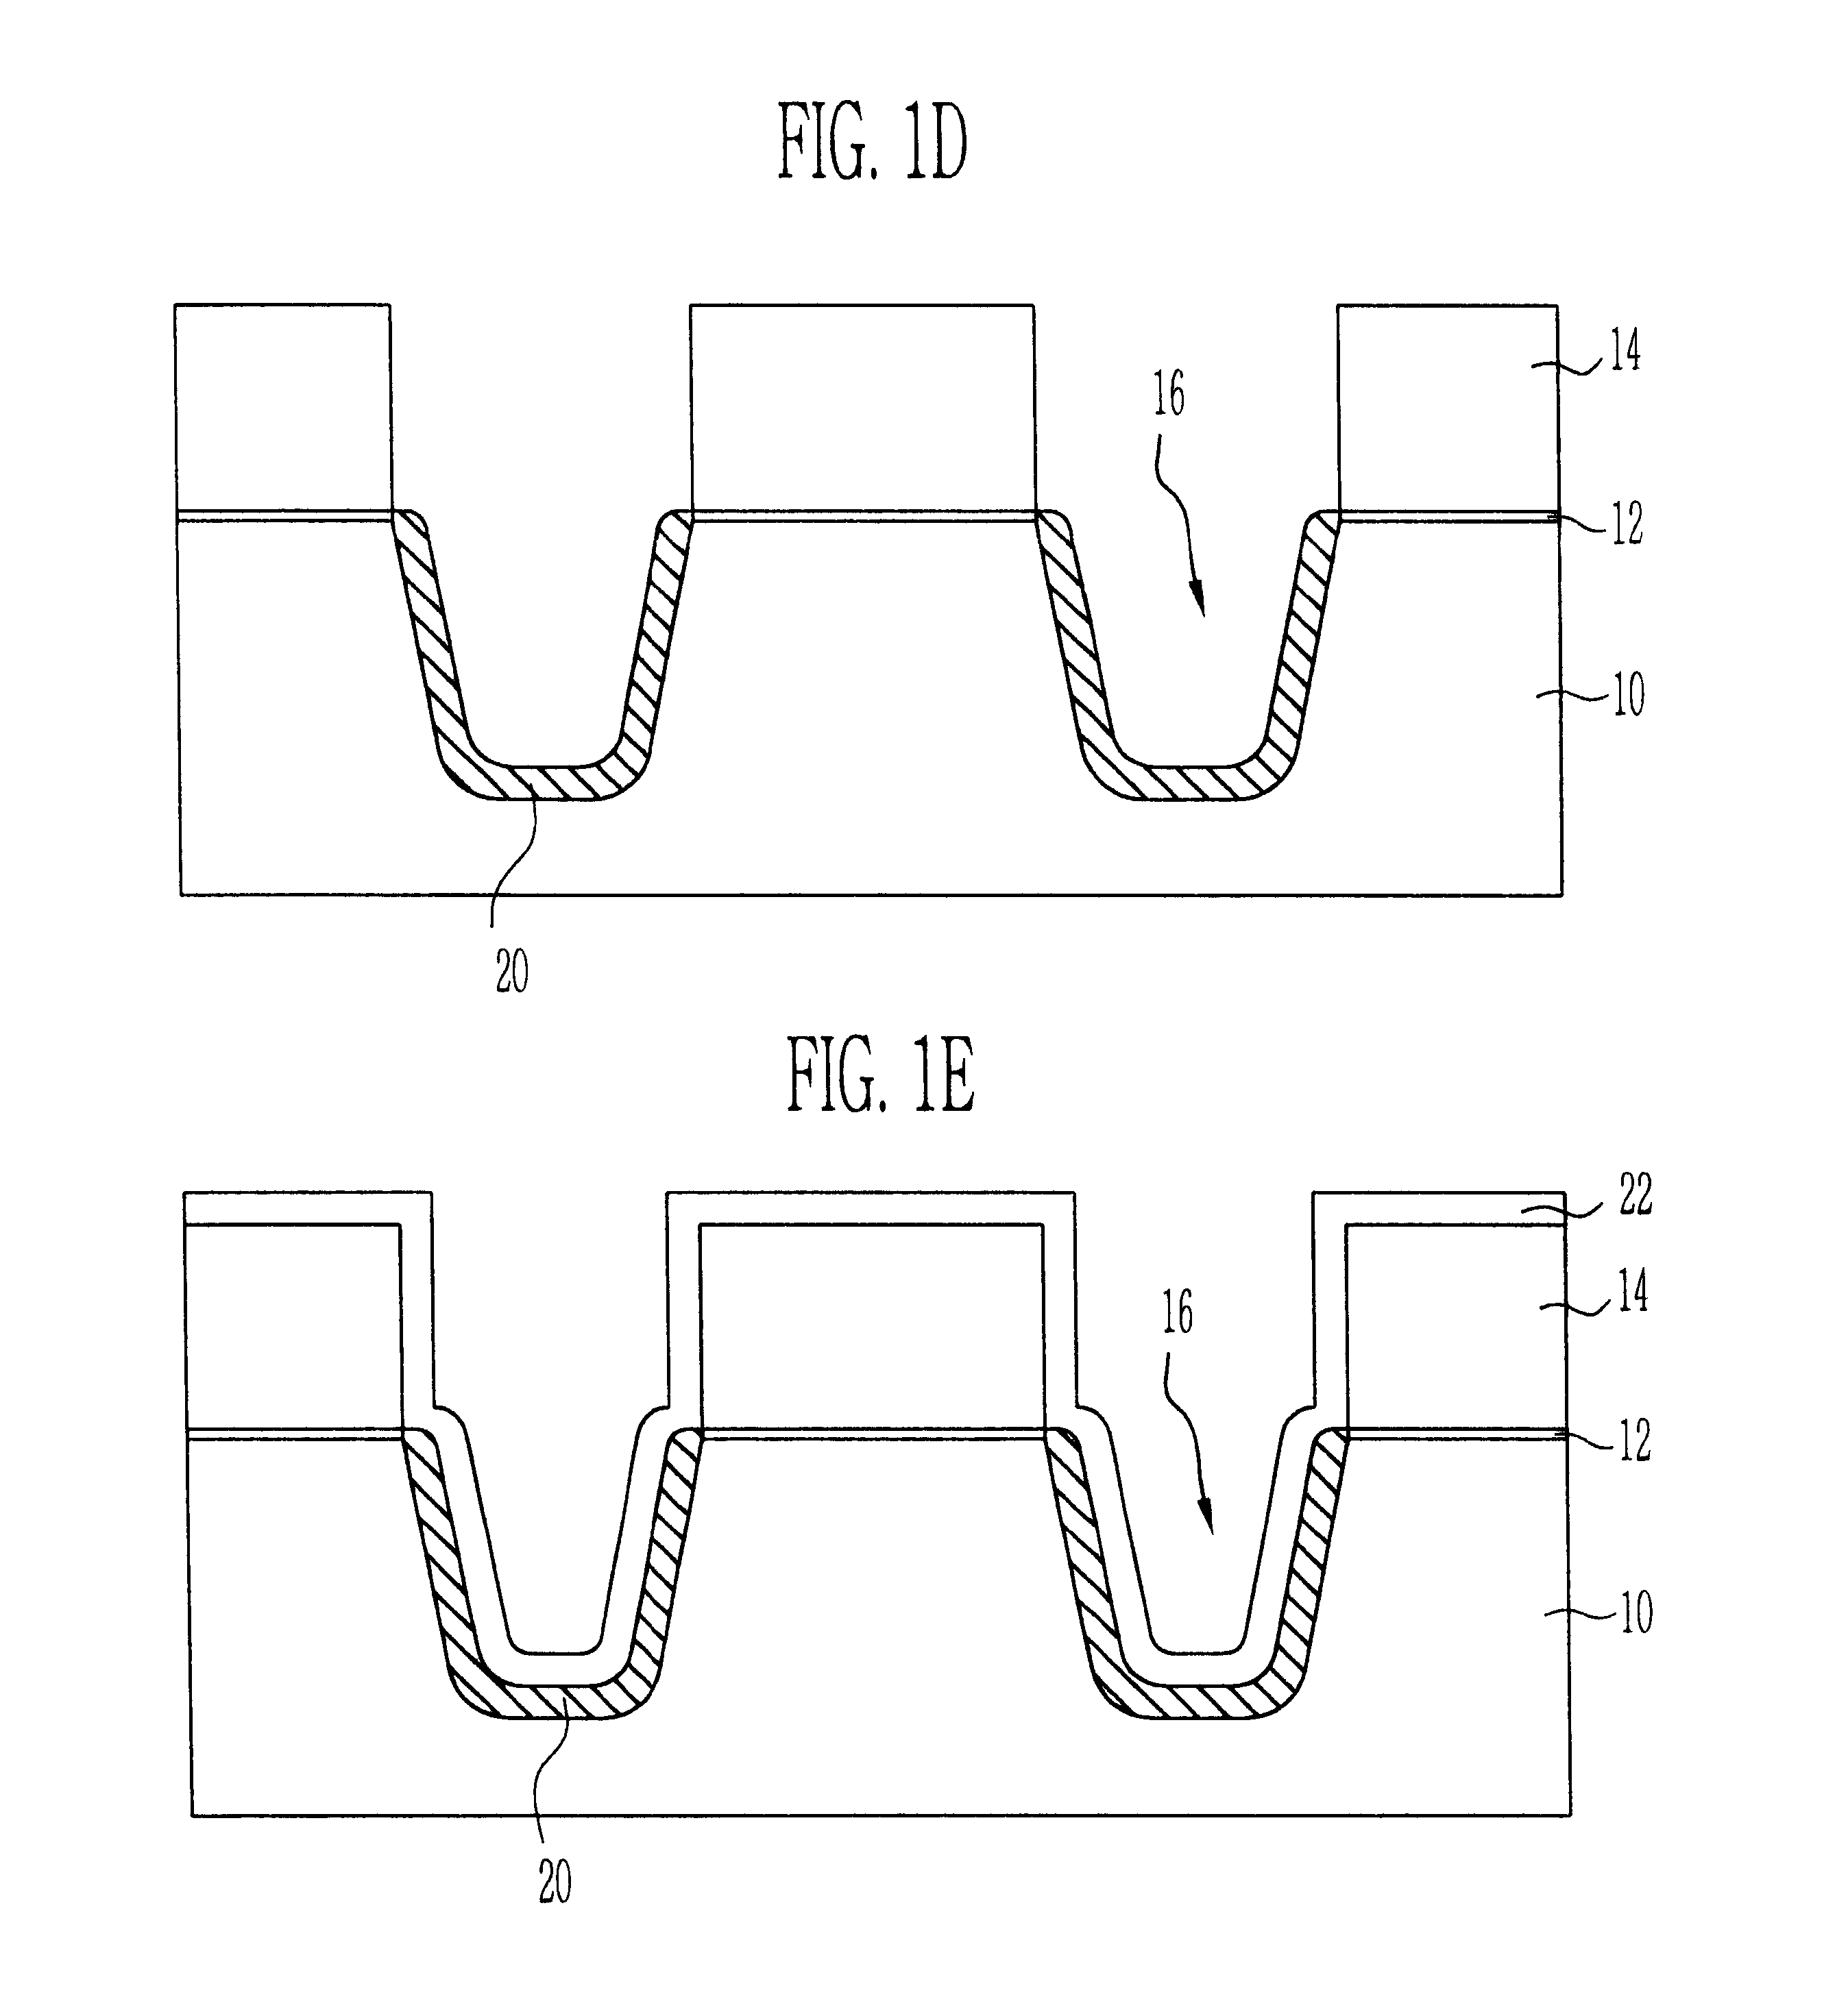 Method of forming a self-aligned floating gate in flash memory cell